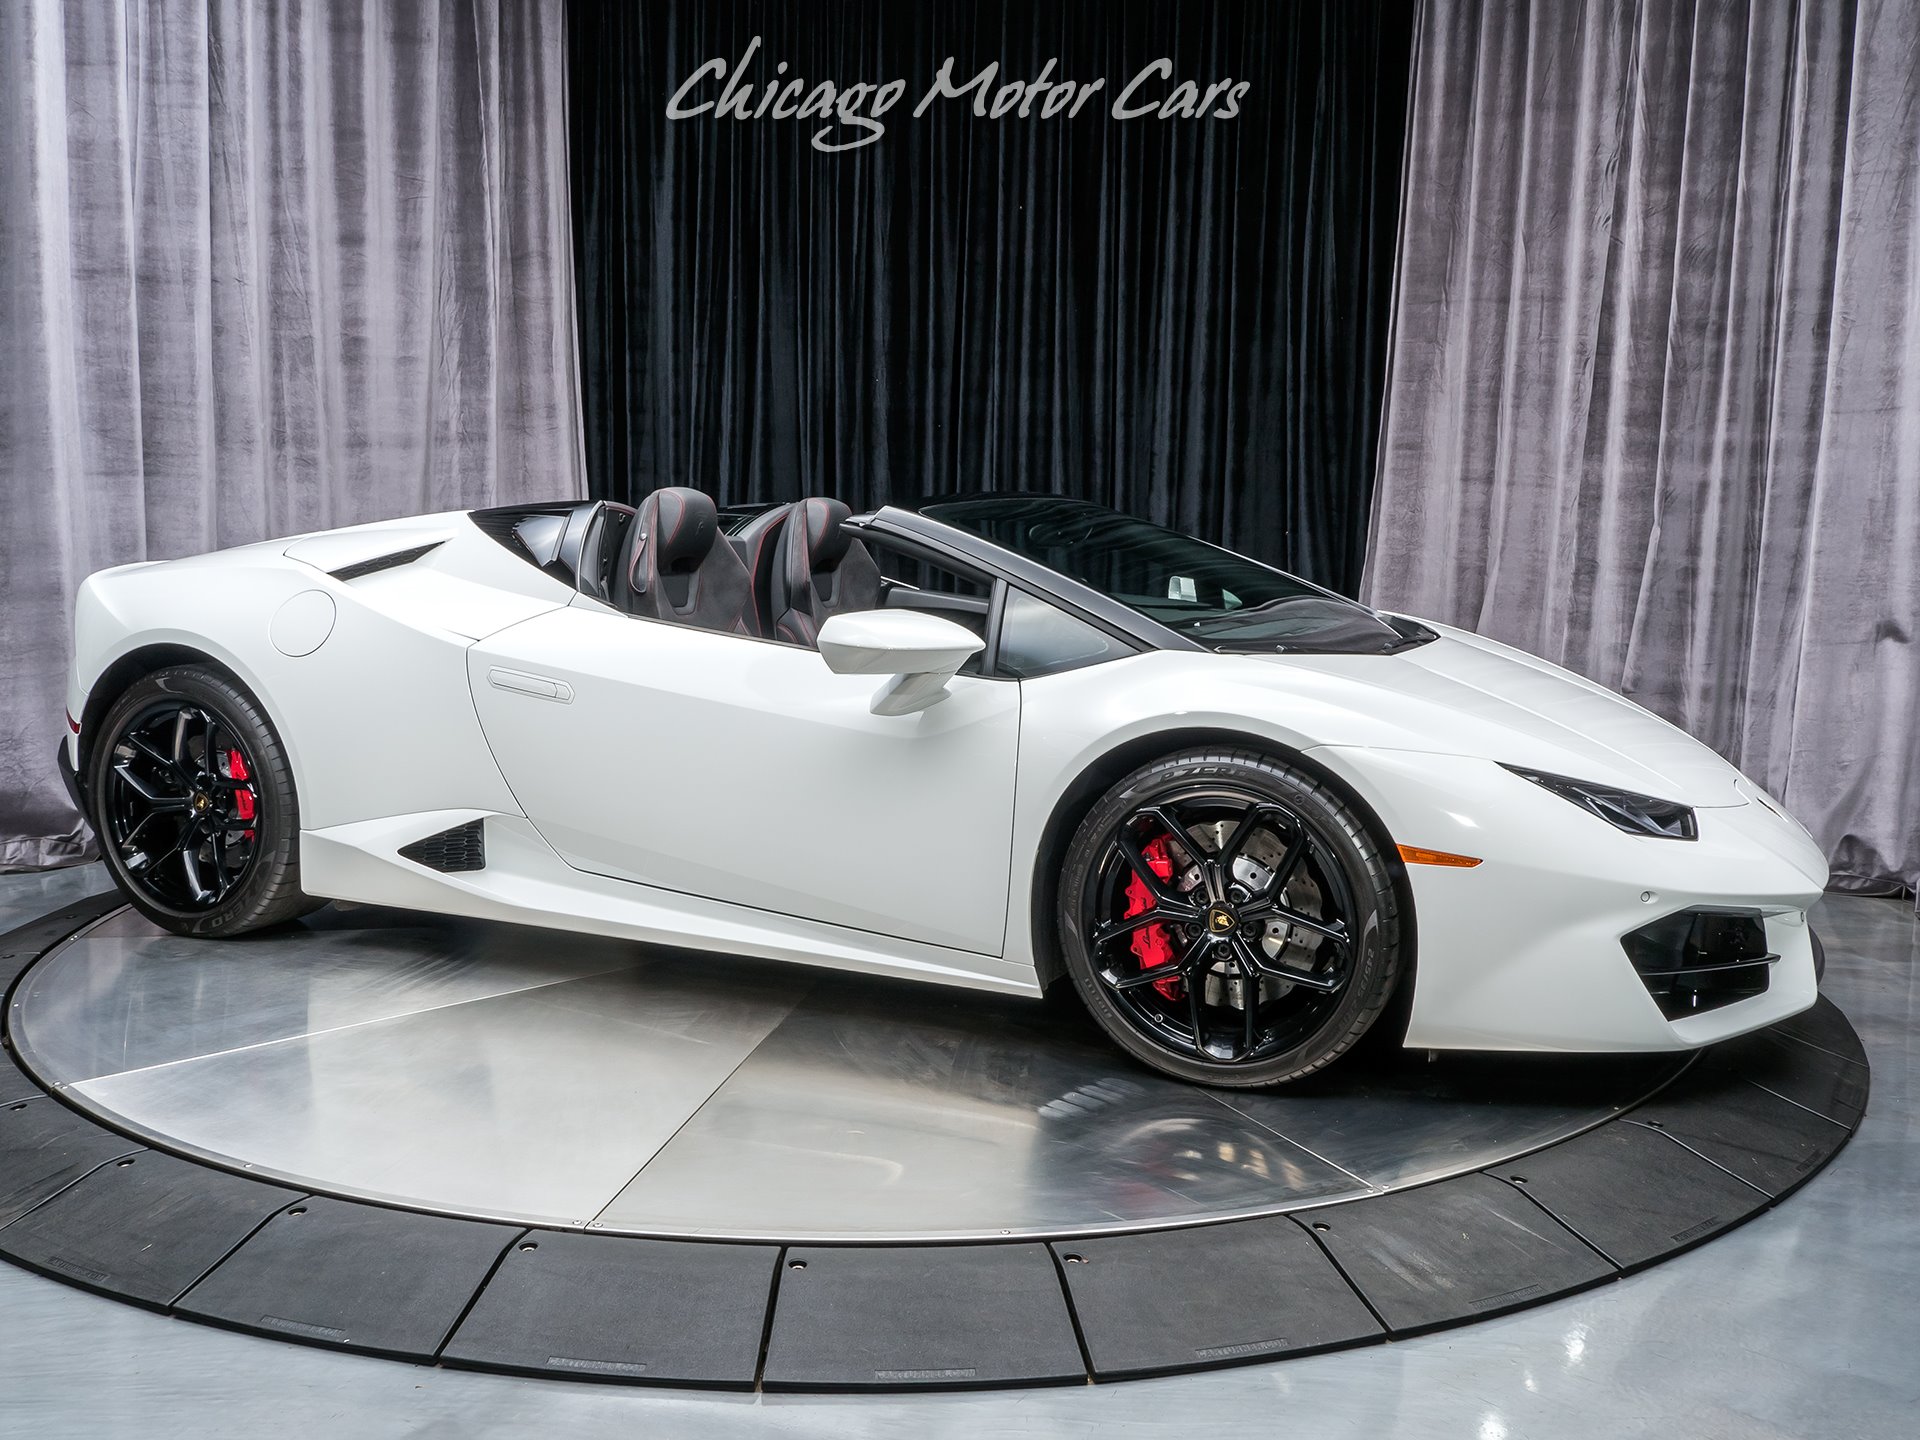 Used 2017 Lamborghini Huracan Lp580 2 Spyder Convertible For Sale Special Pricing Chicago 3599